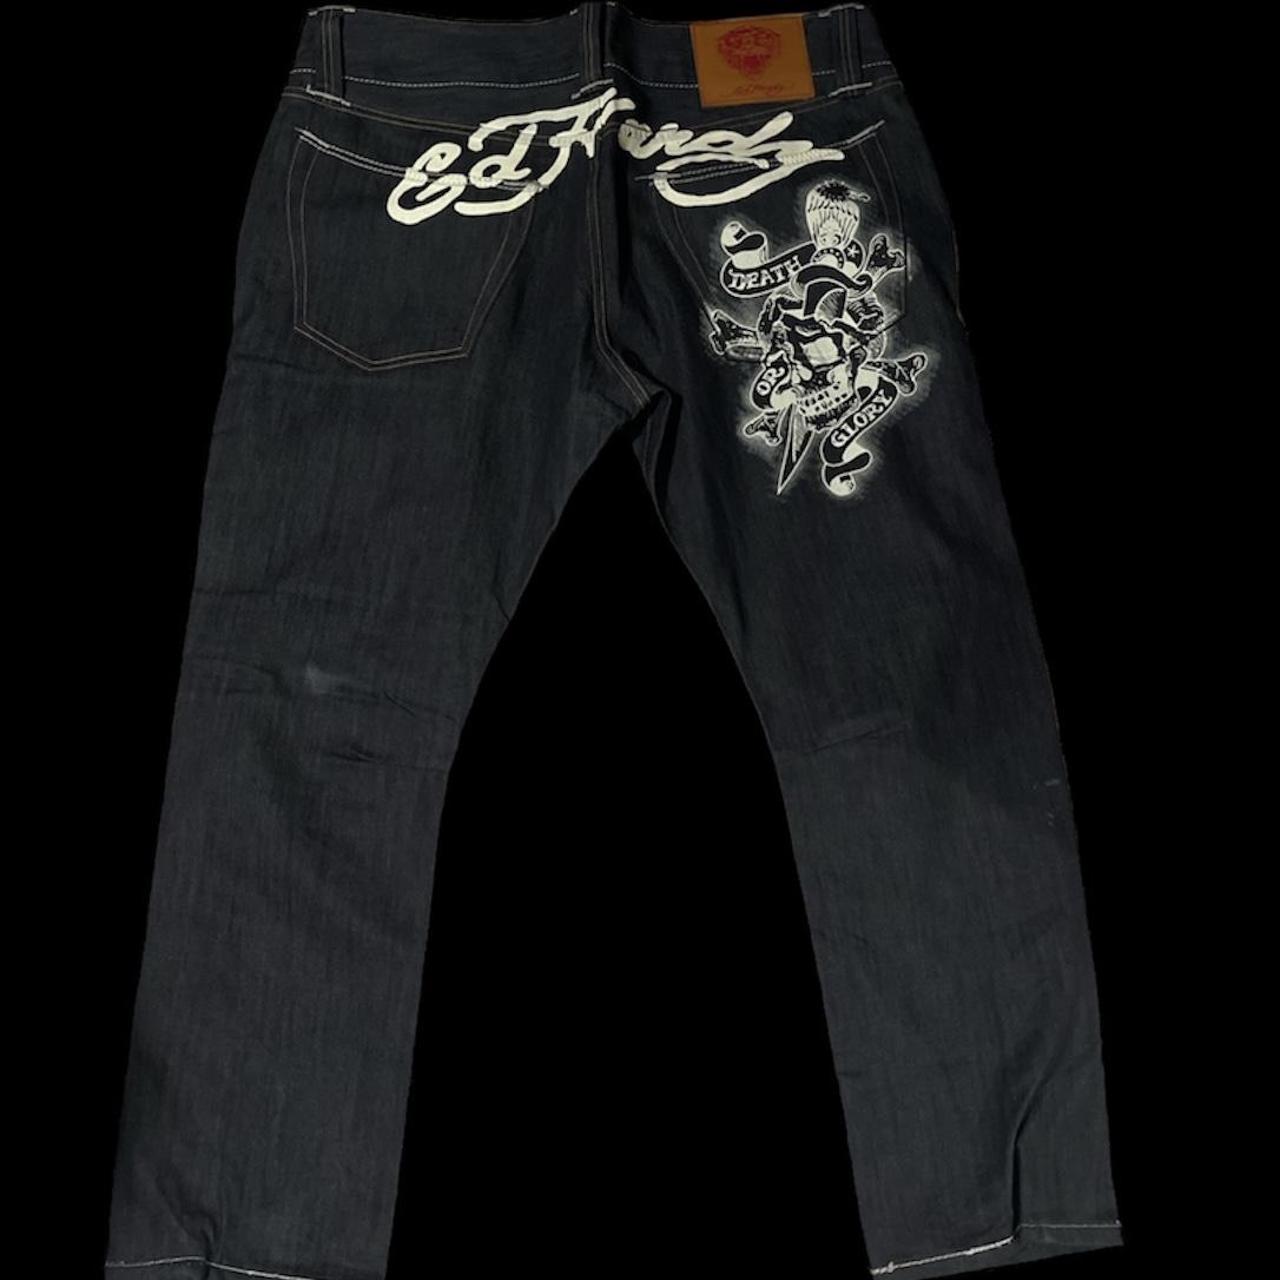 Ed hardy jeans from the 2000’s SUPER RARE!!! Size... - Depop